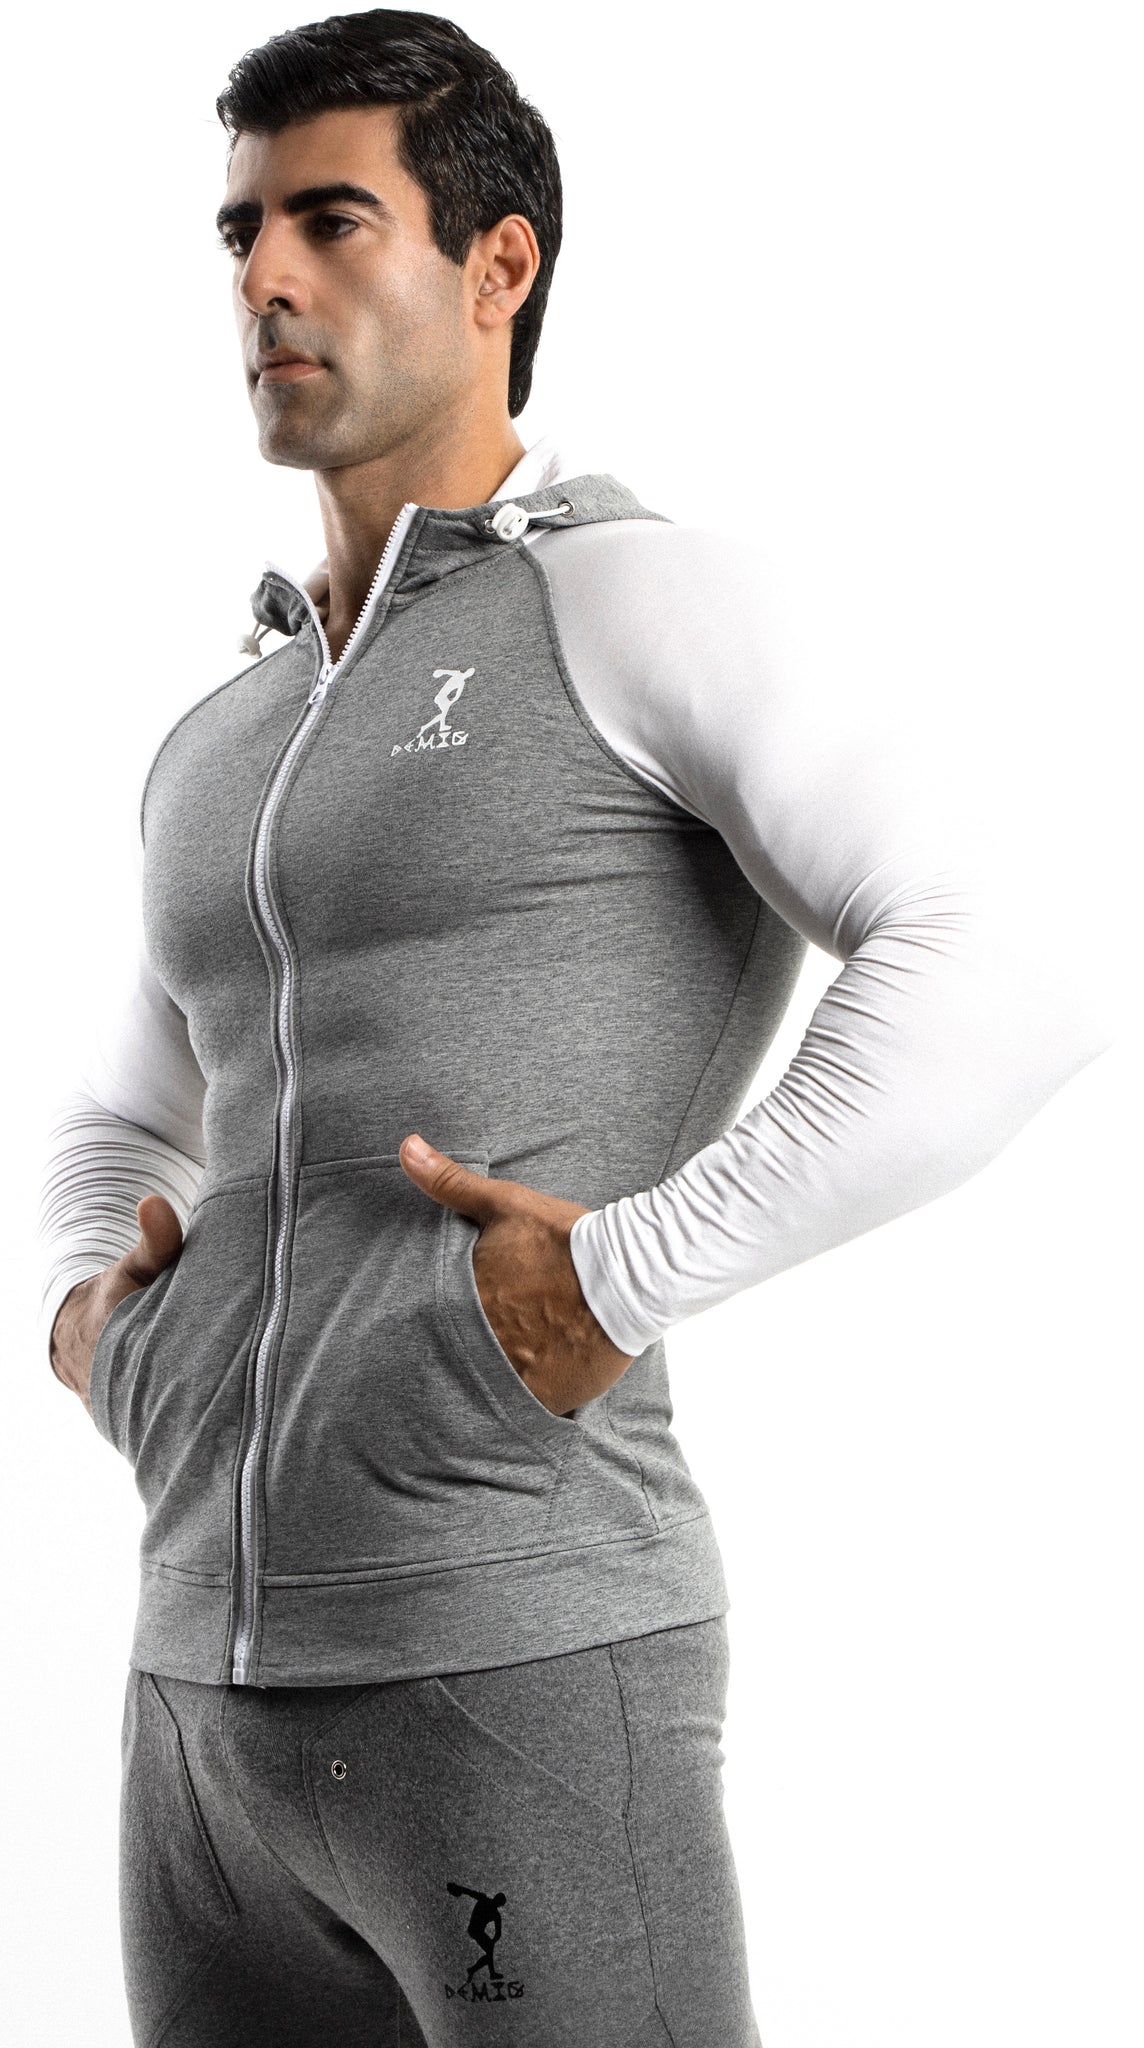 Mens Gray Zip Up Hoodie Slim Fit with Kanga Pockets Made with Organic Cotton and Microfiber - DEMIG